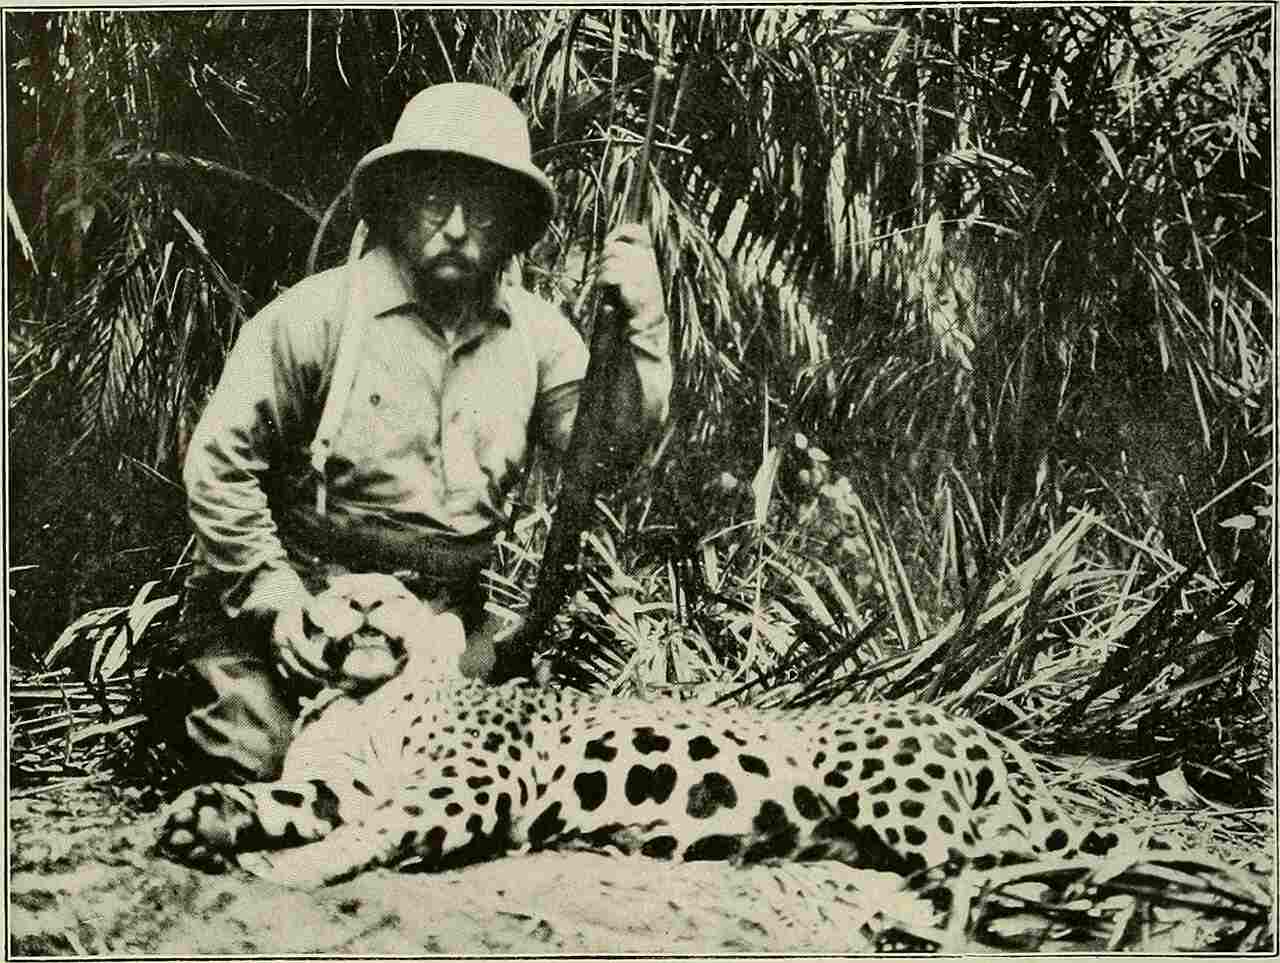 What Eats A Jaguar In the Rainforest: Humans are Ultimate Apex Predators That Can Use Superior Intelligence and Tools to Take Down Jaguars (Credit: Internet Archive Book Images 1915)